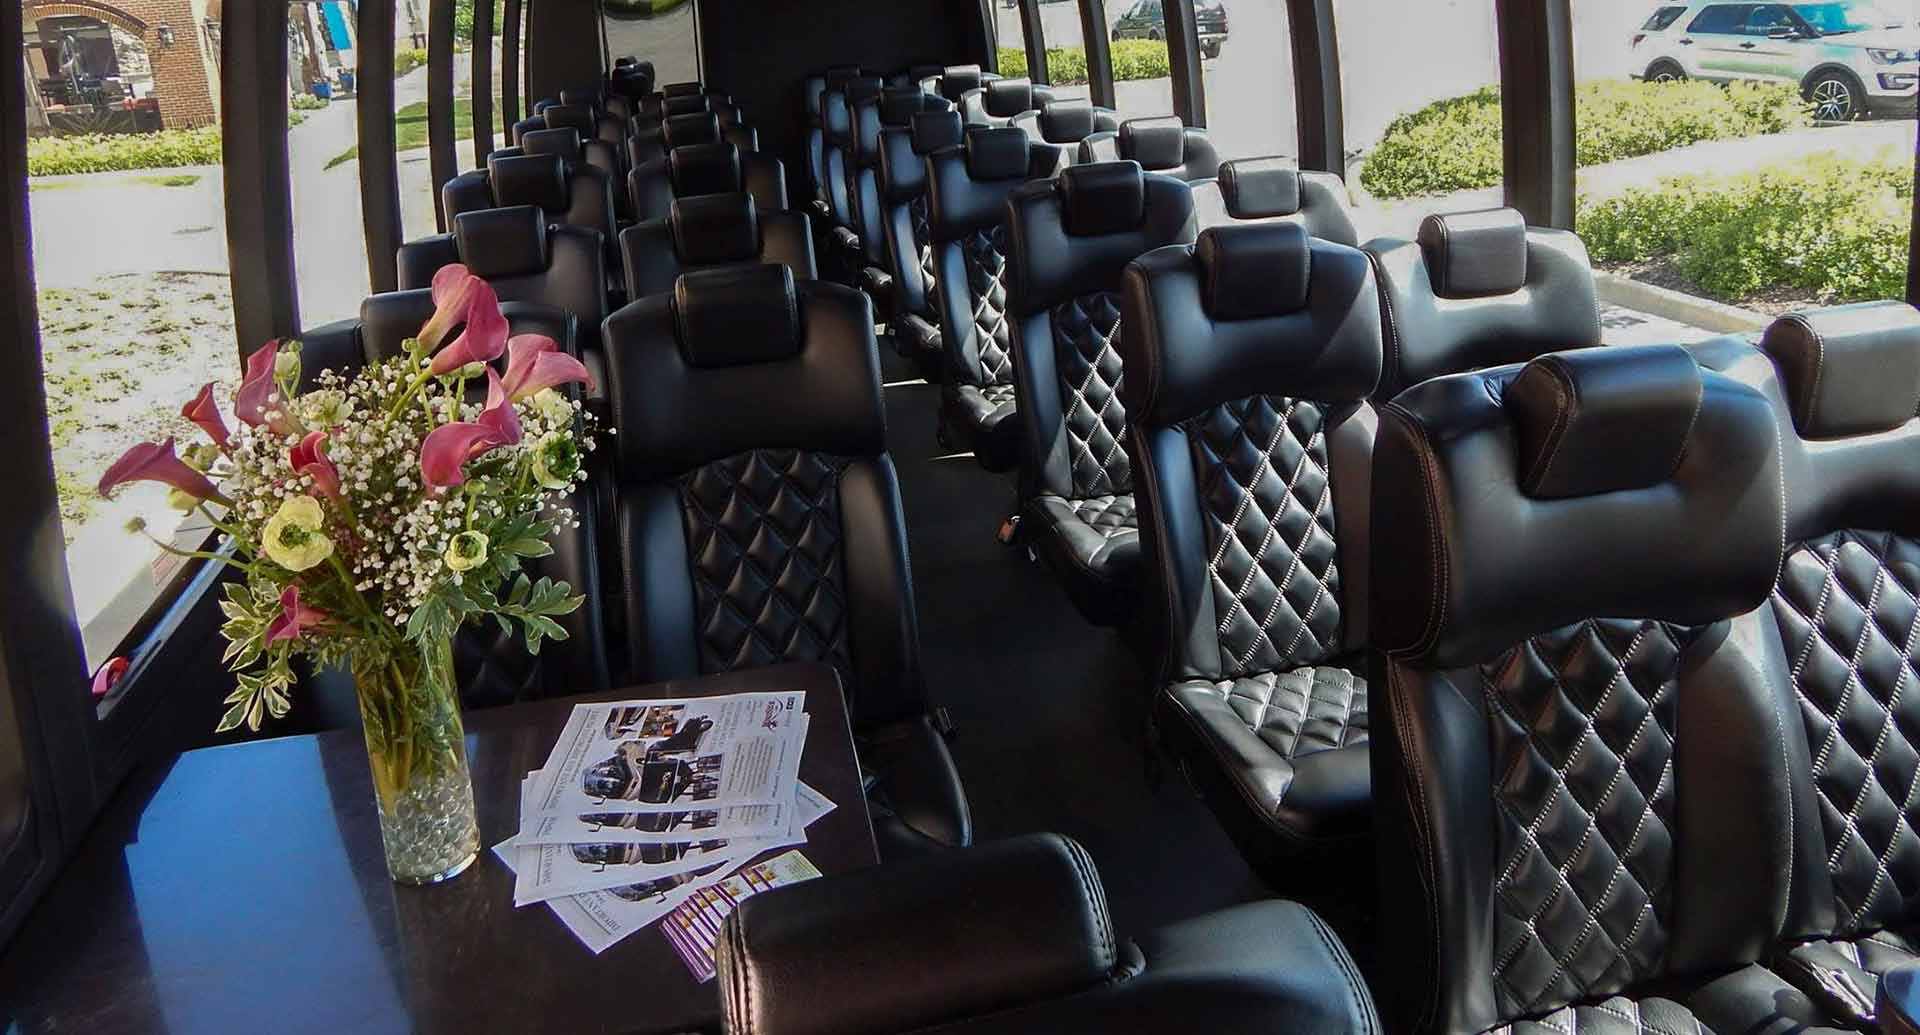 Charter Bus leather seats with a table and flowers